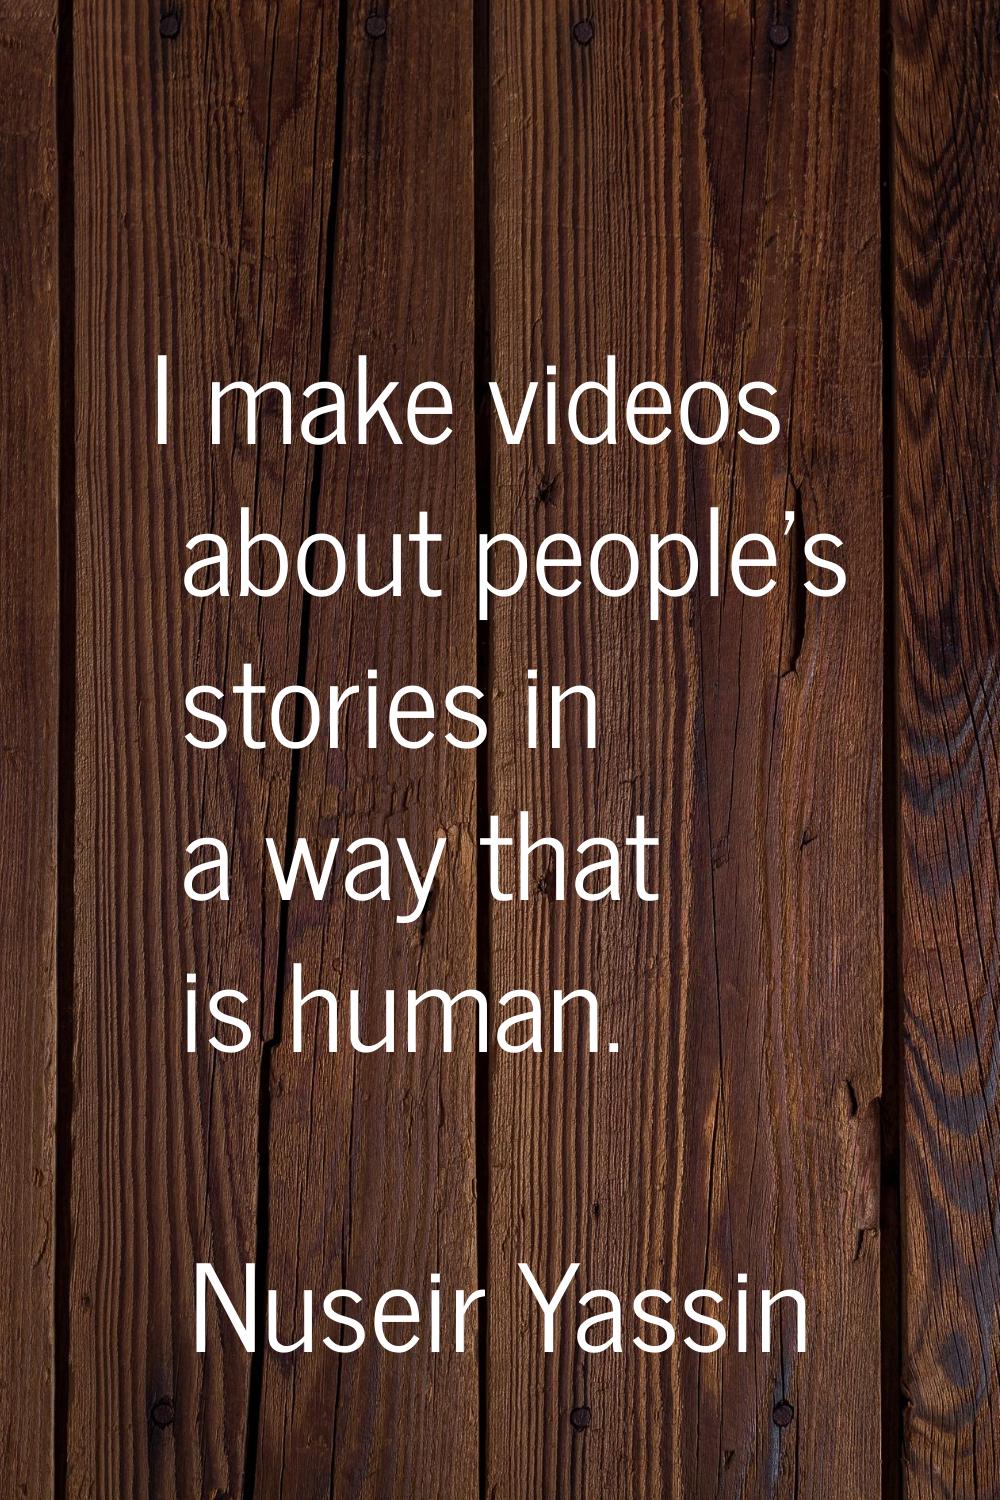 I make videos about people's stories in a way that is human.